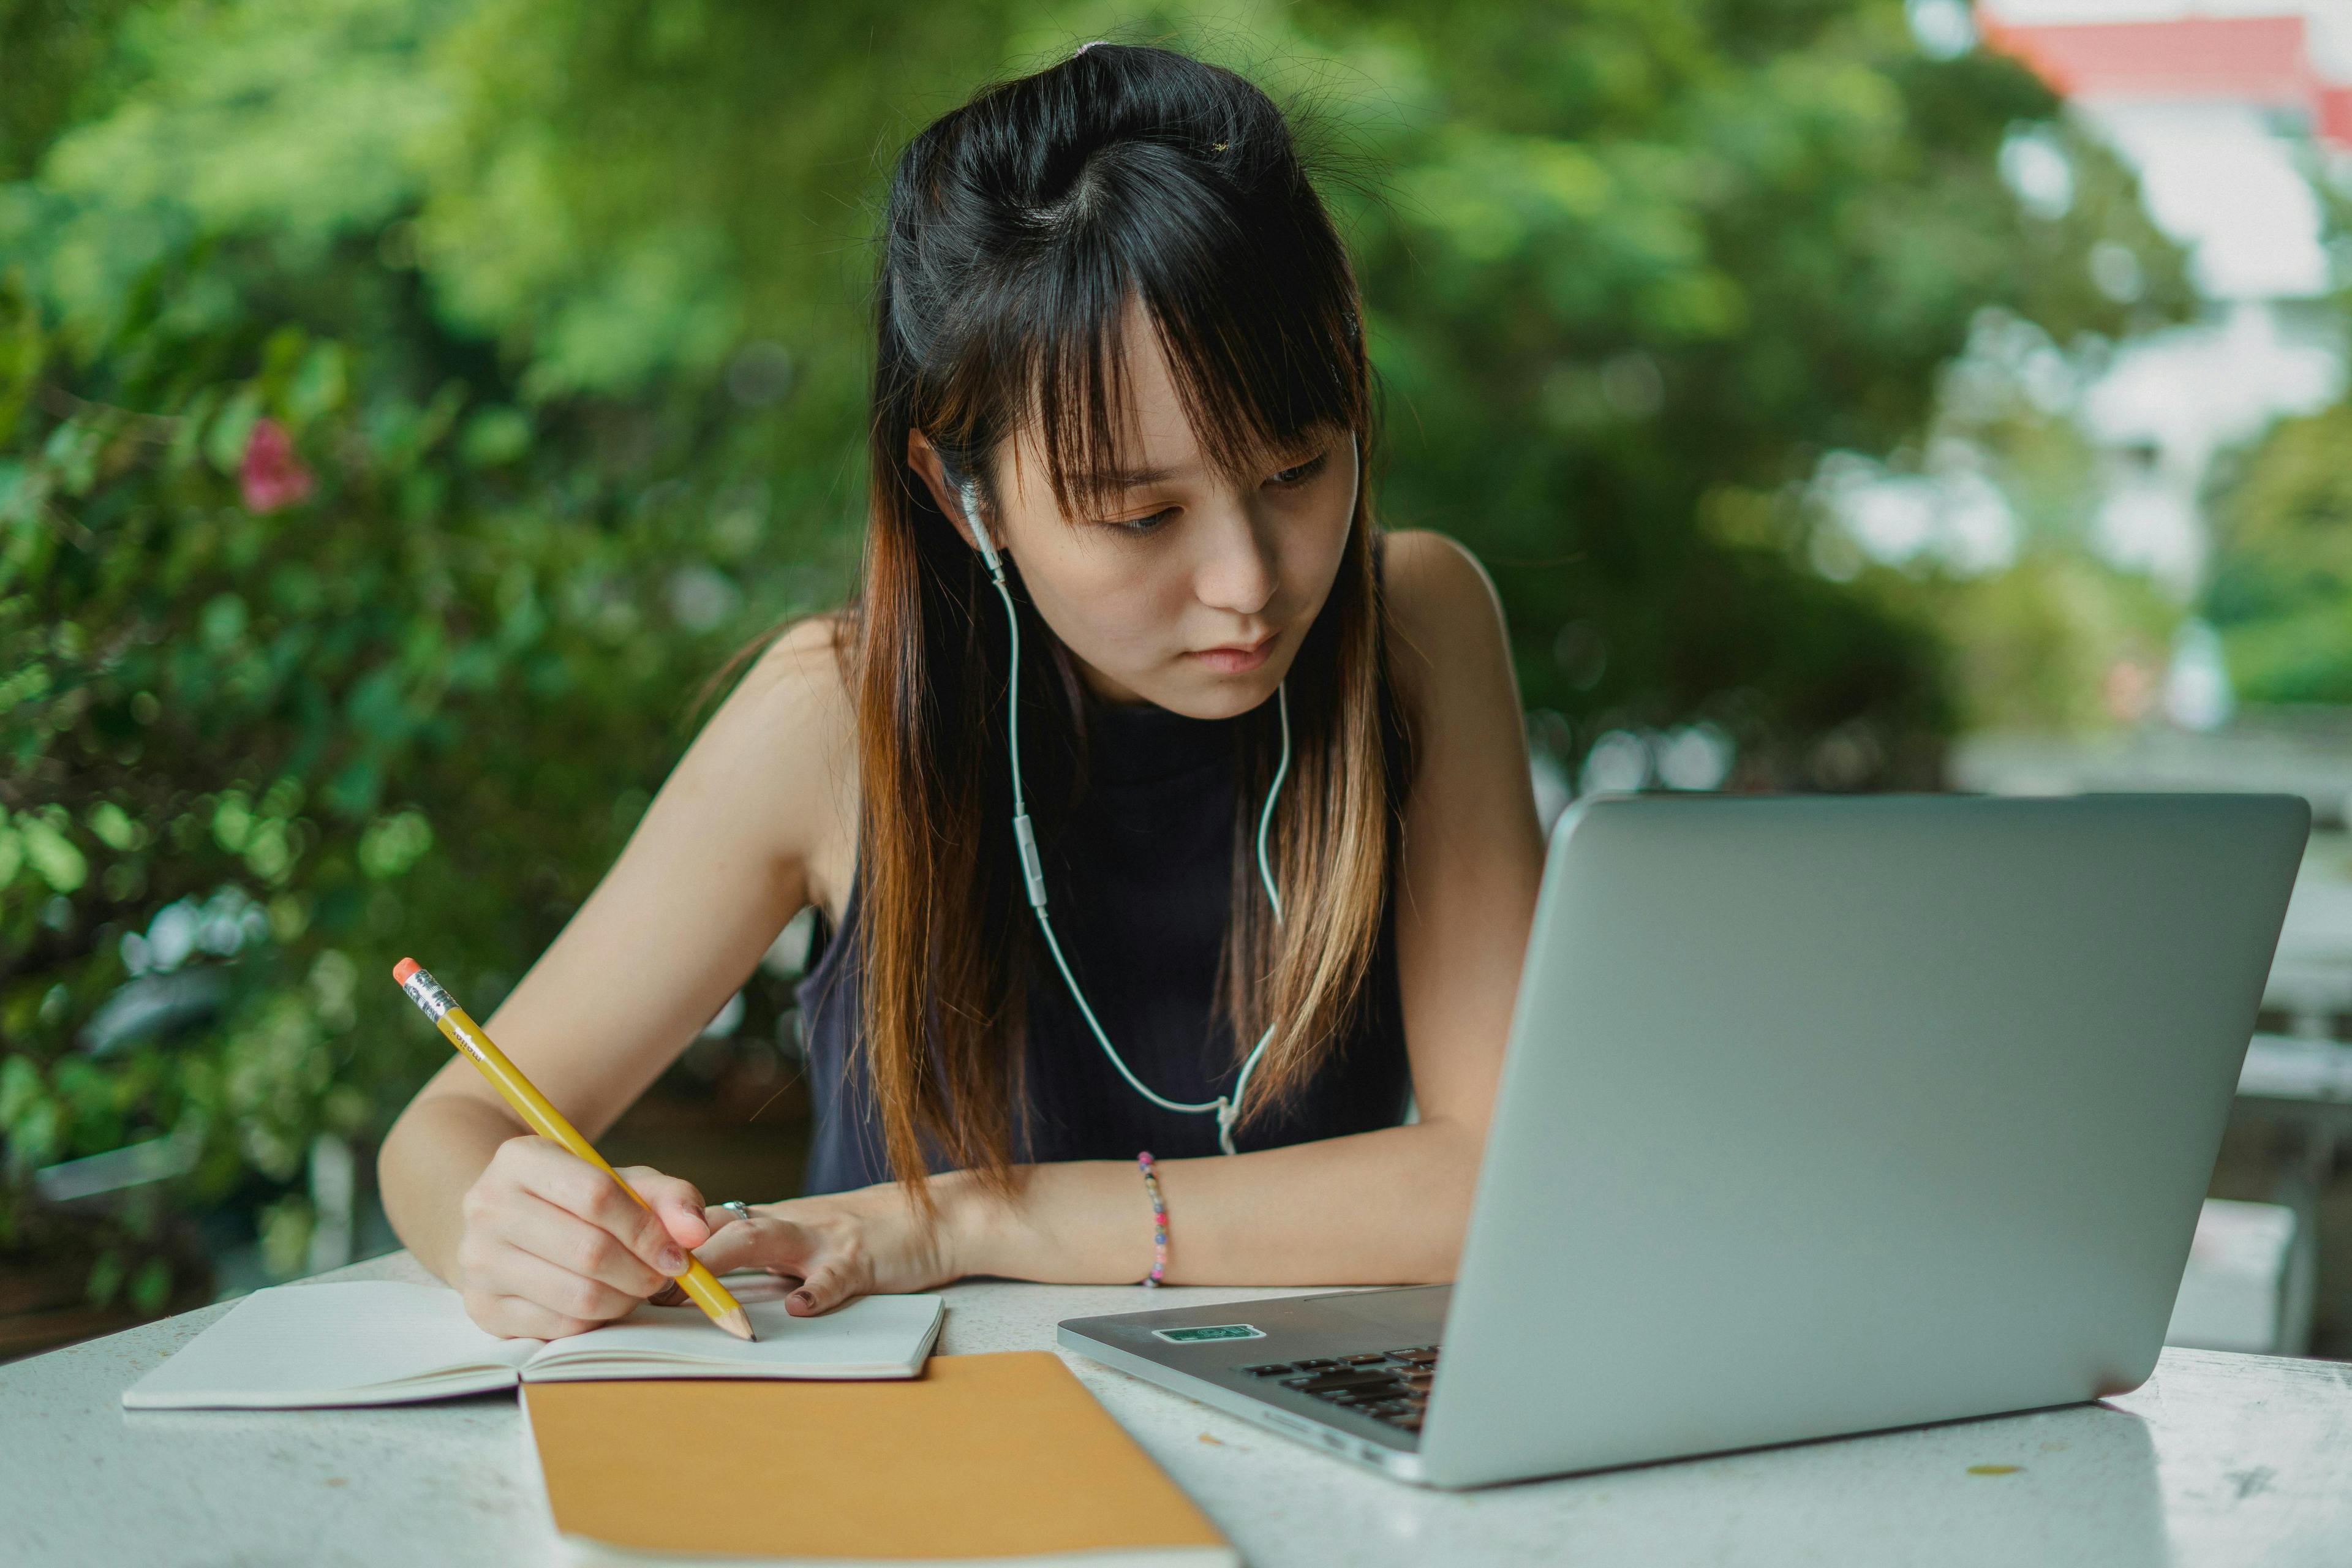 A young woman working on her laptop while taking notes in a notebook, set in a peaceful outdoor environment. This image is perfect for illustrating the "leader VS manager" concept, emphasizing a leader's ability to work efficiently in various settings.